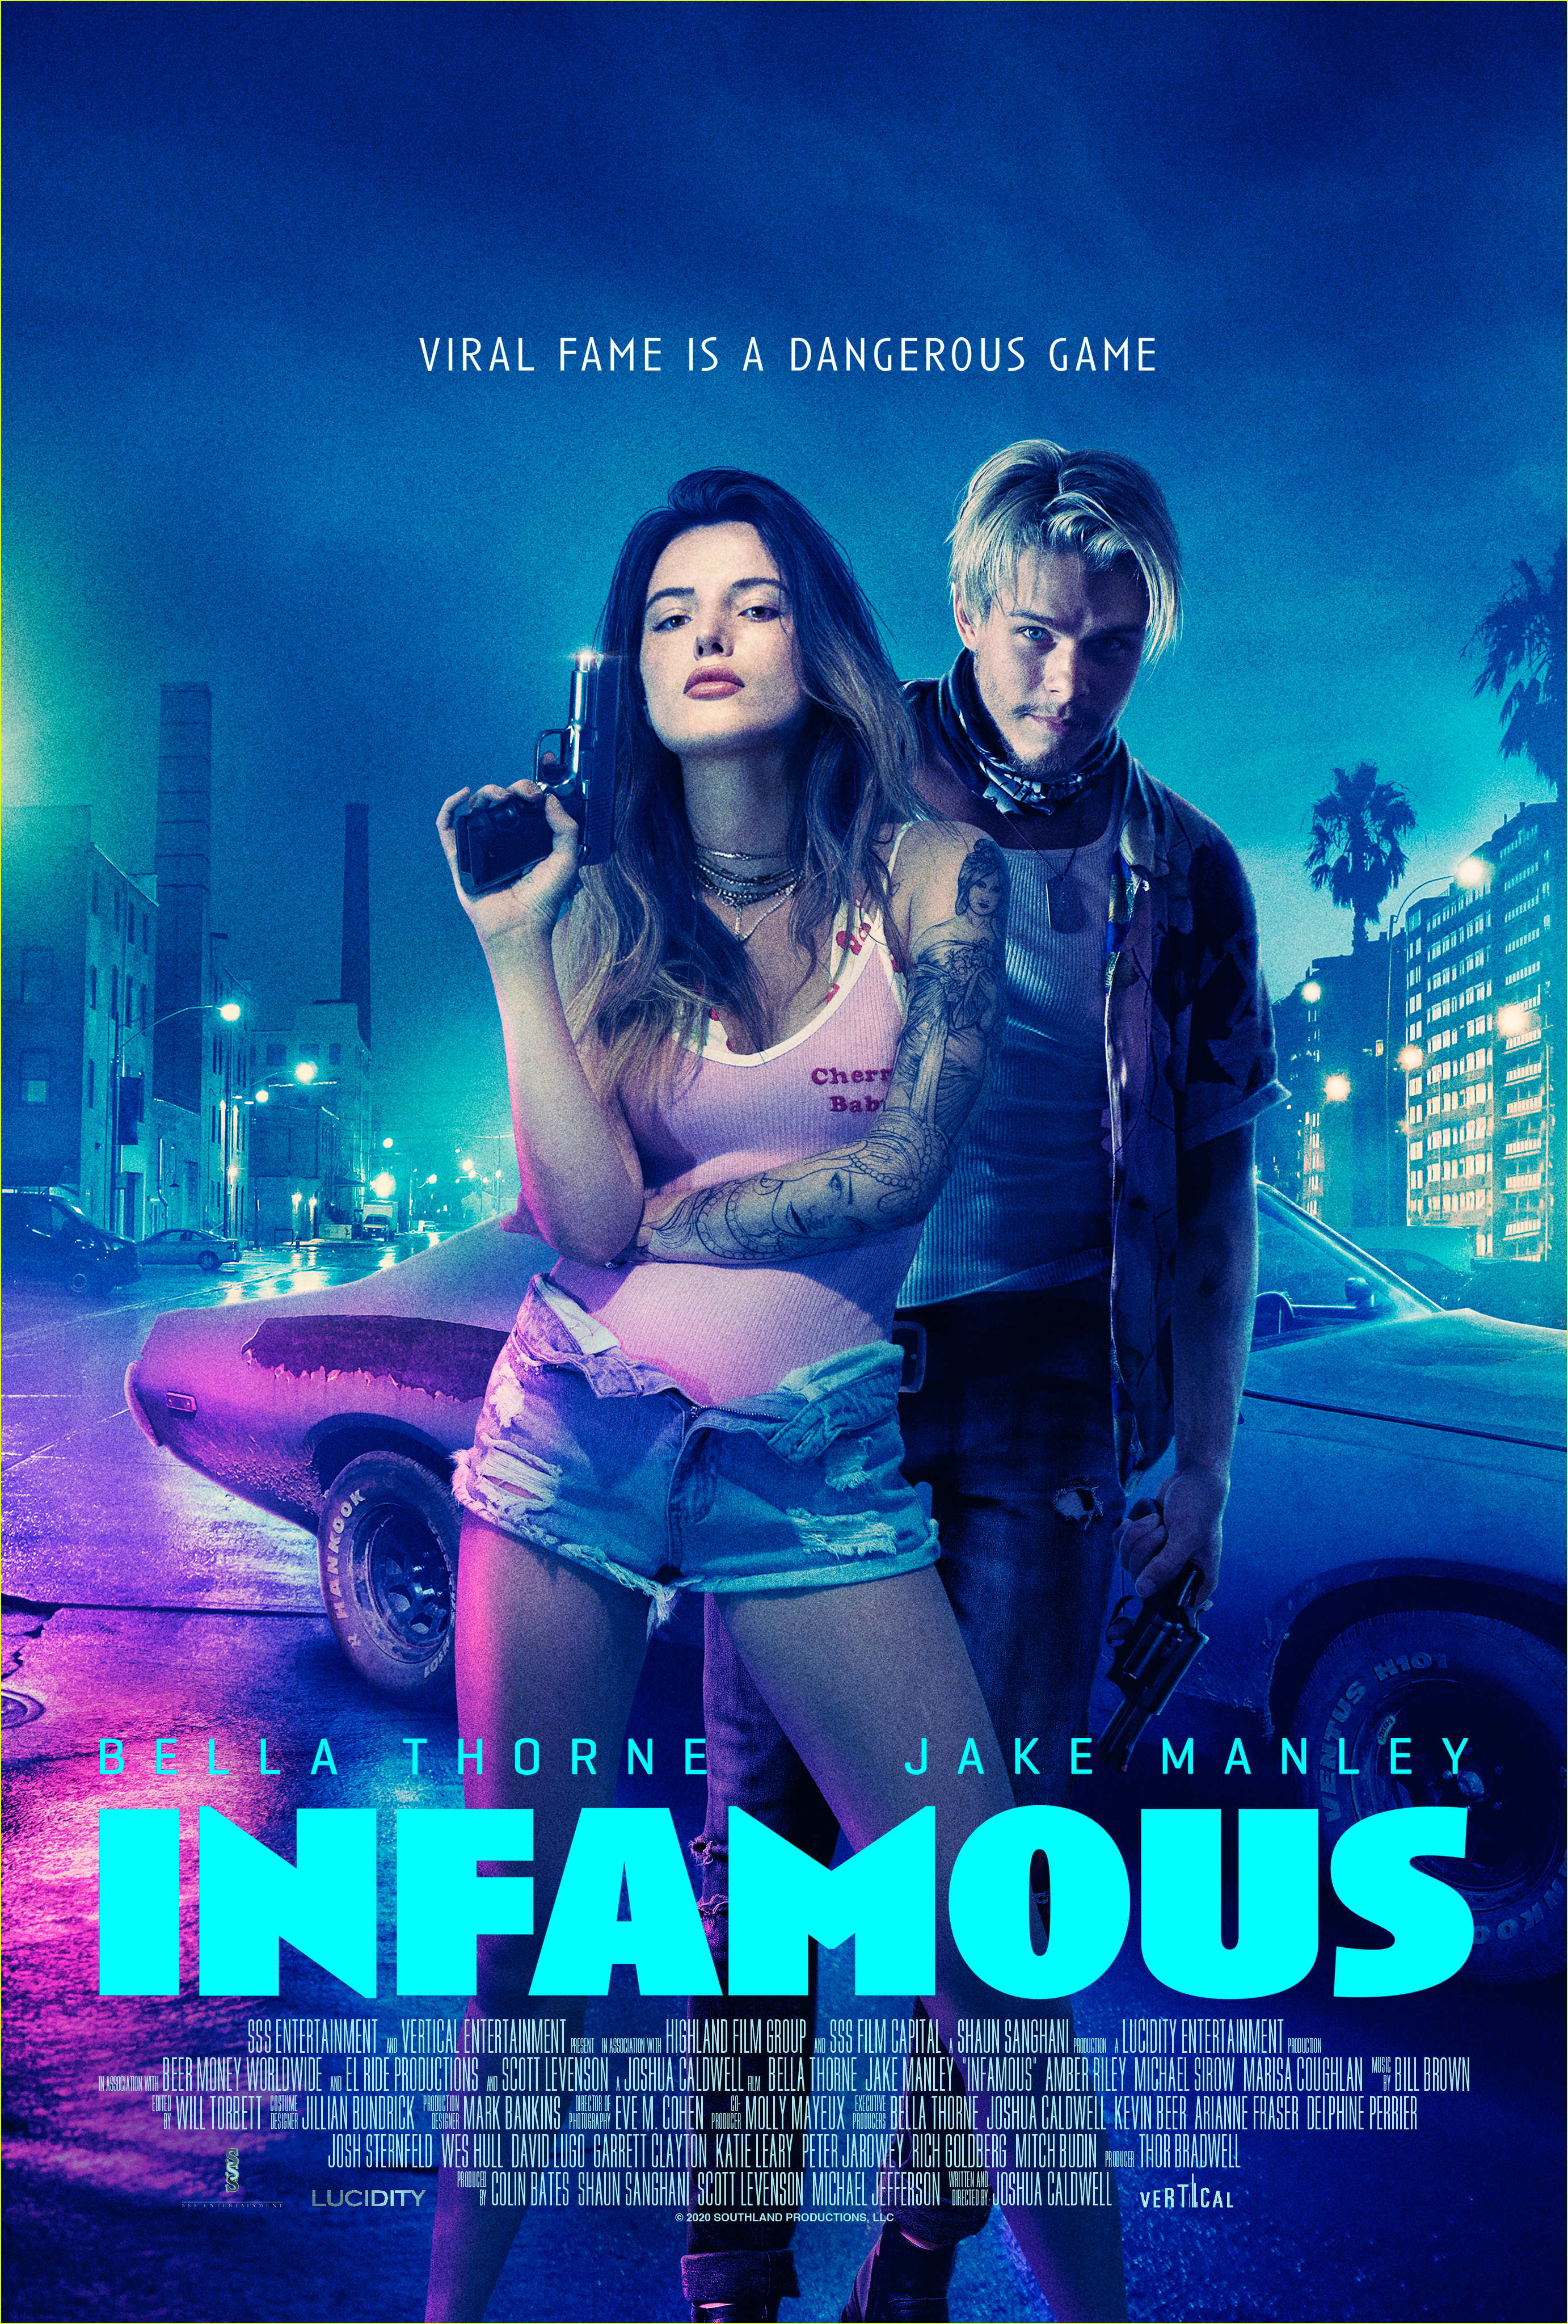 bella thorne is up to no good in infamous trailer 02